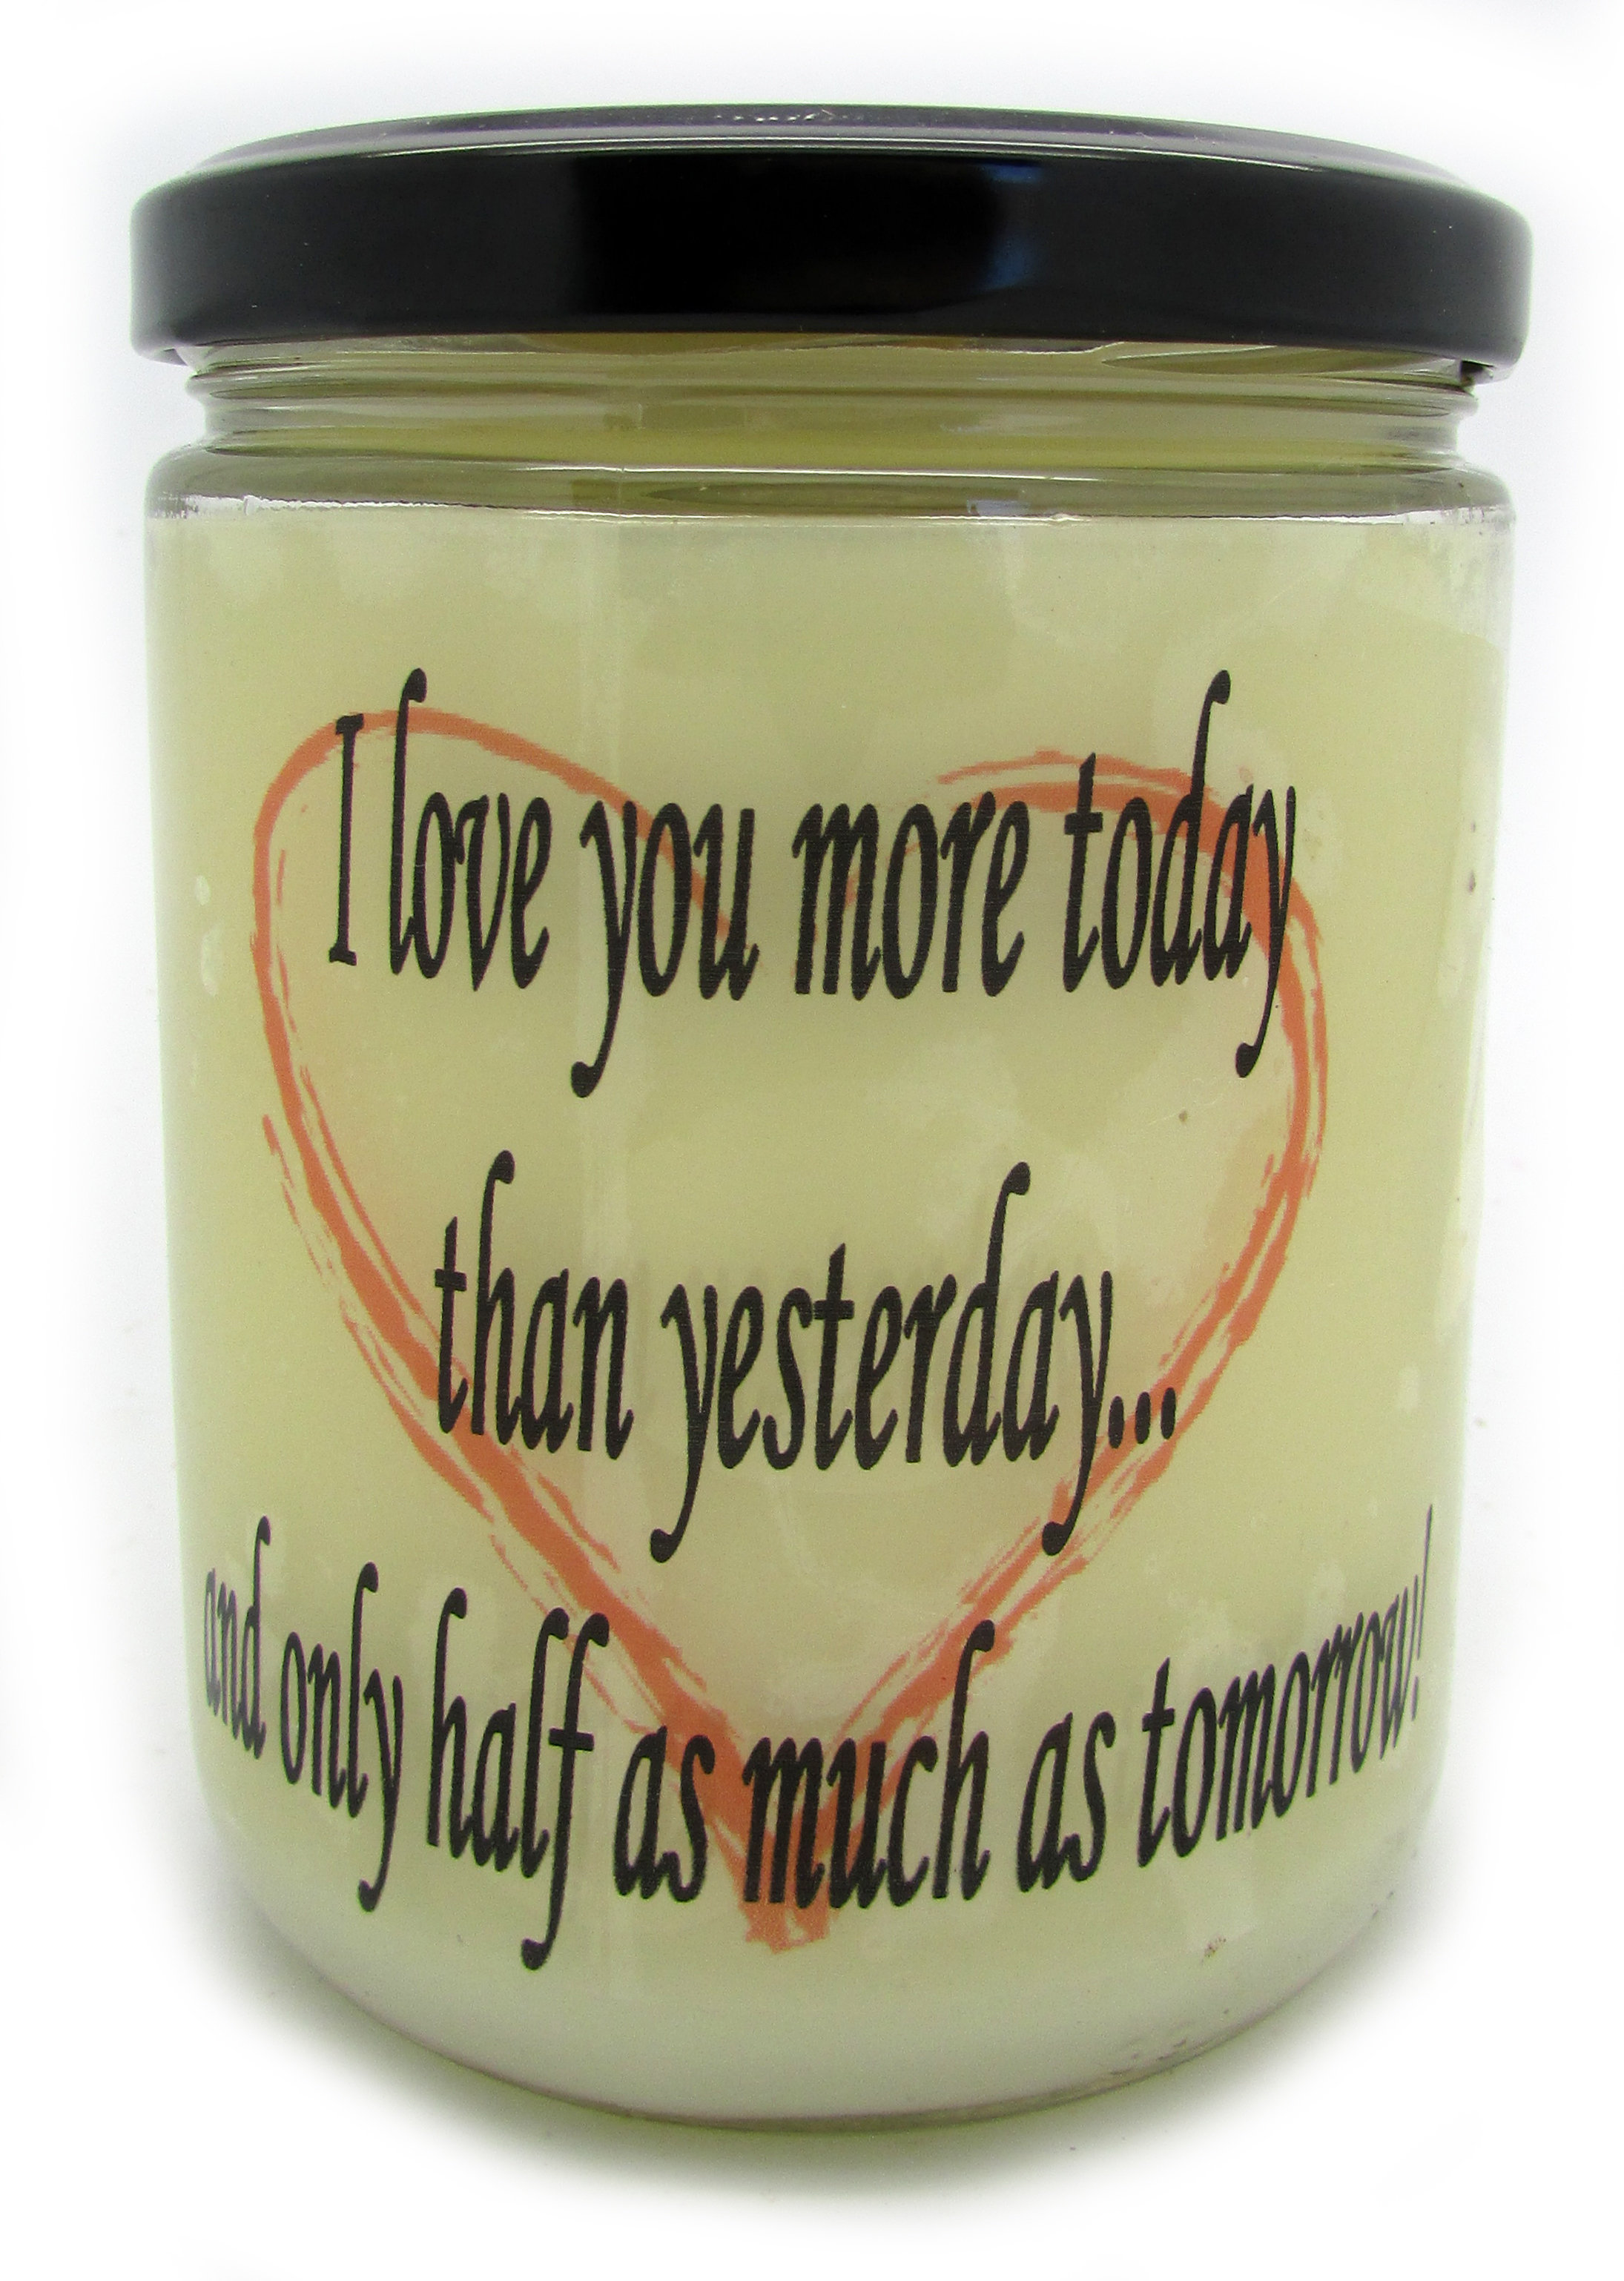 Starhollowcandleco I Love You More Today Than Yesterday And Only Half As Much As Tomorrow Cinnamon Bun Scented Jar Candle Wayfair